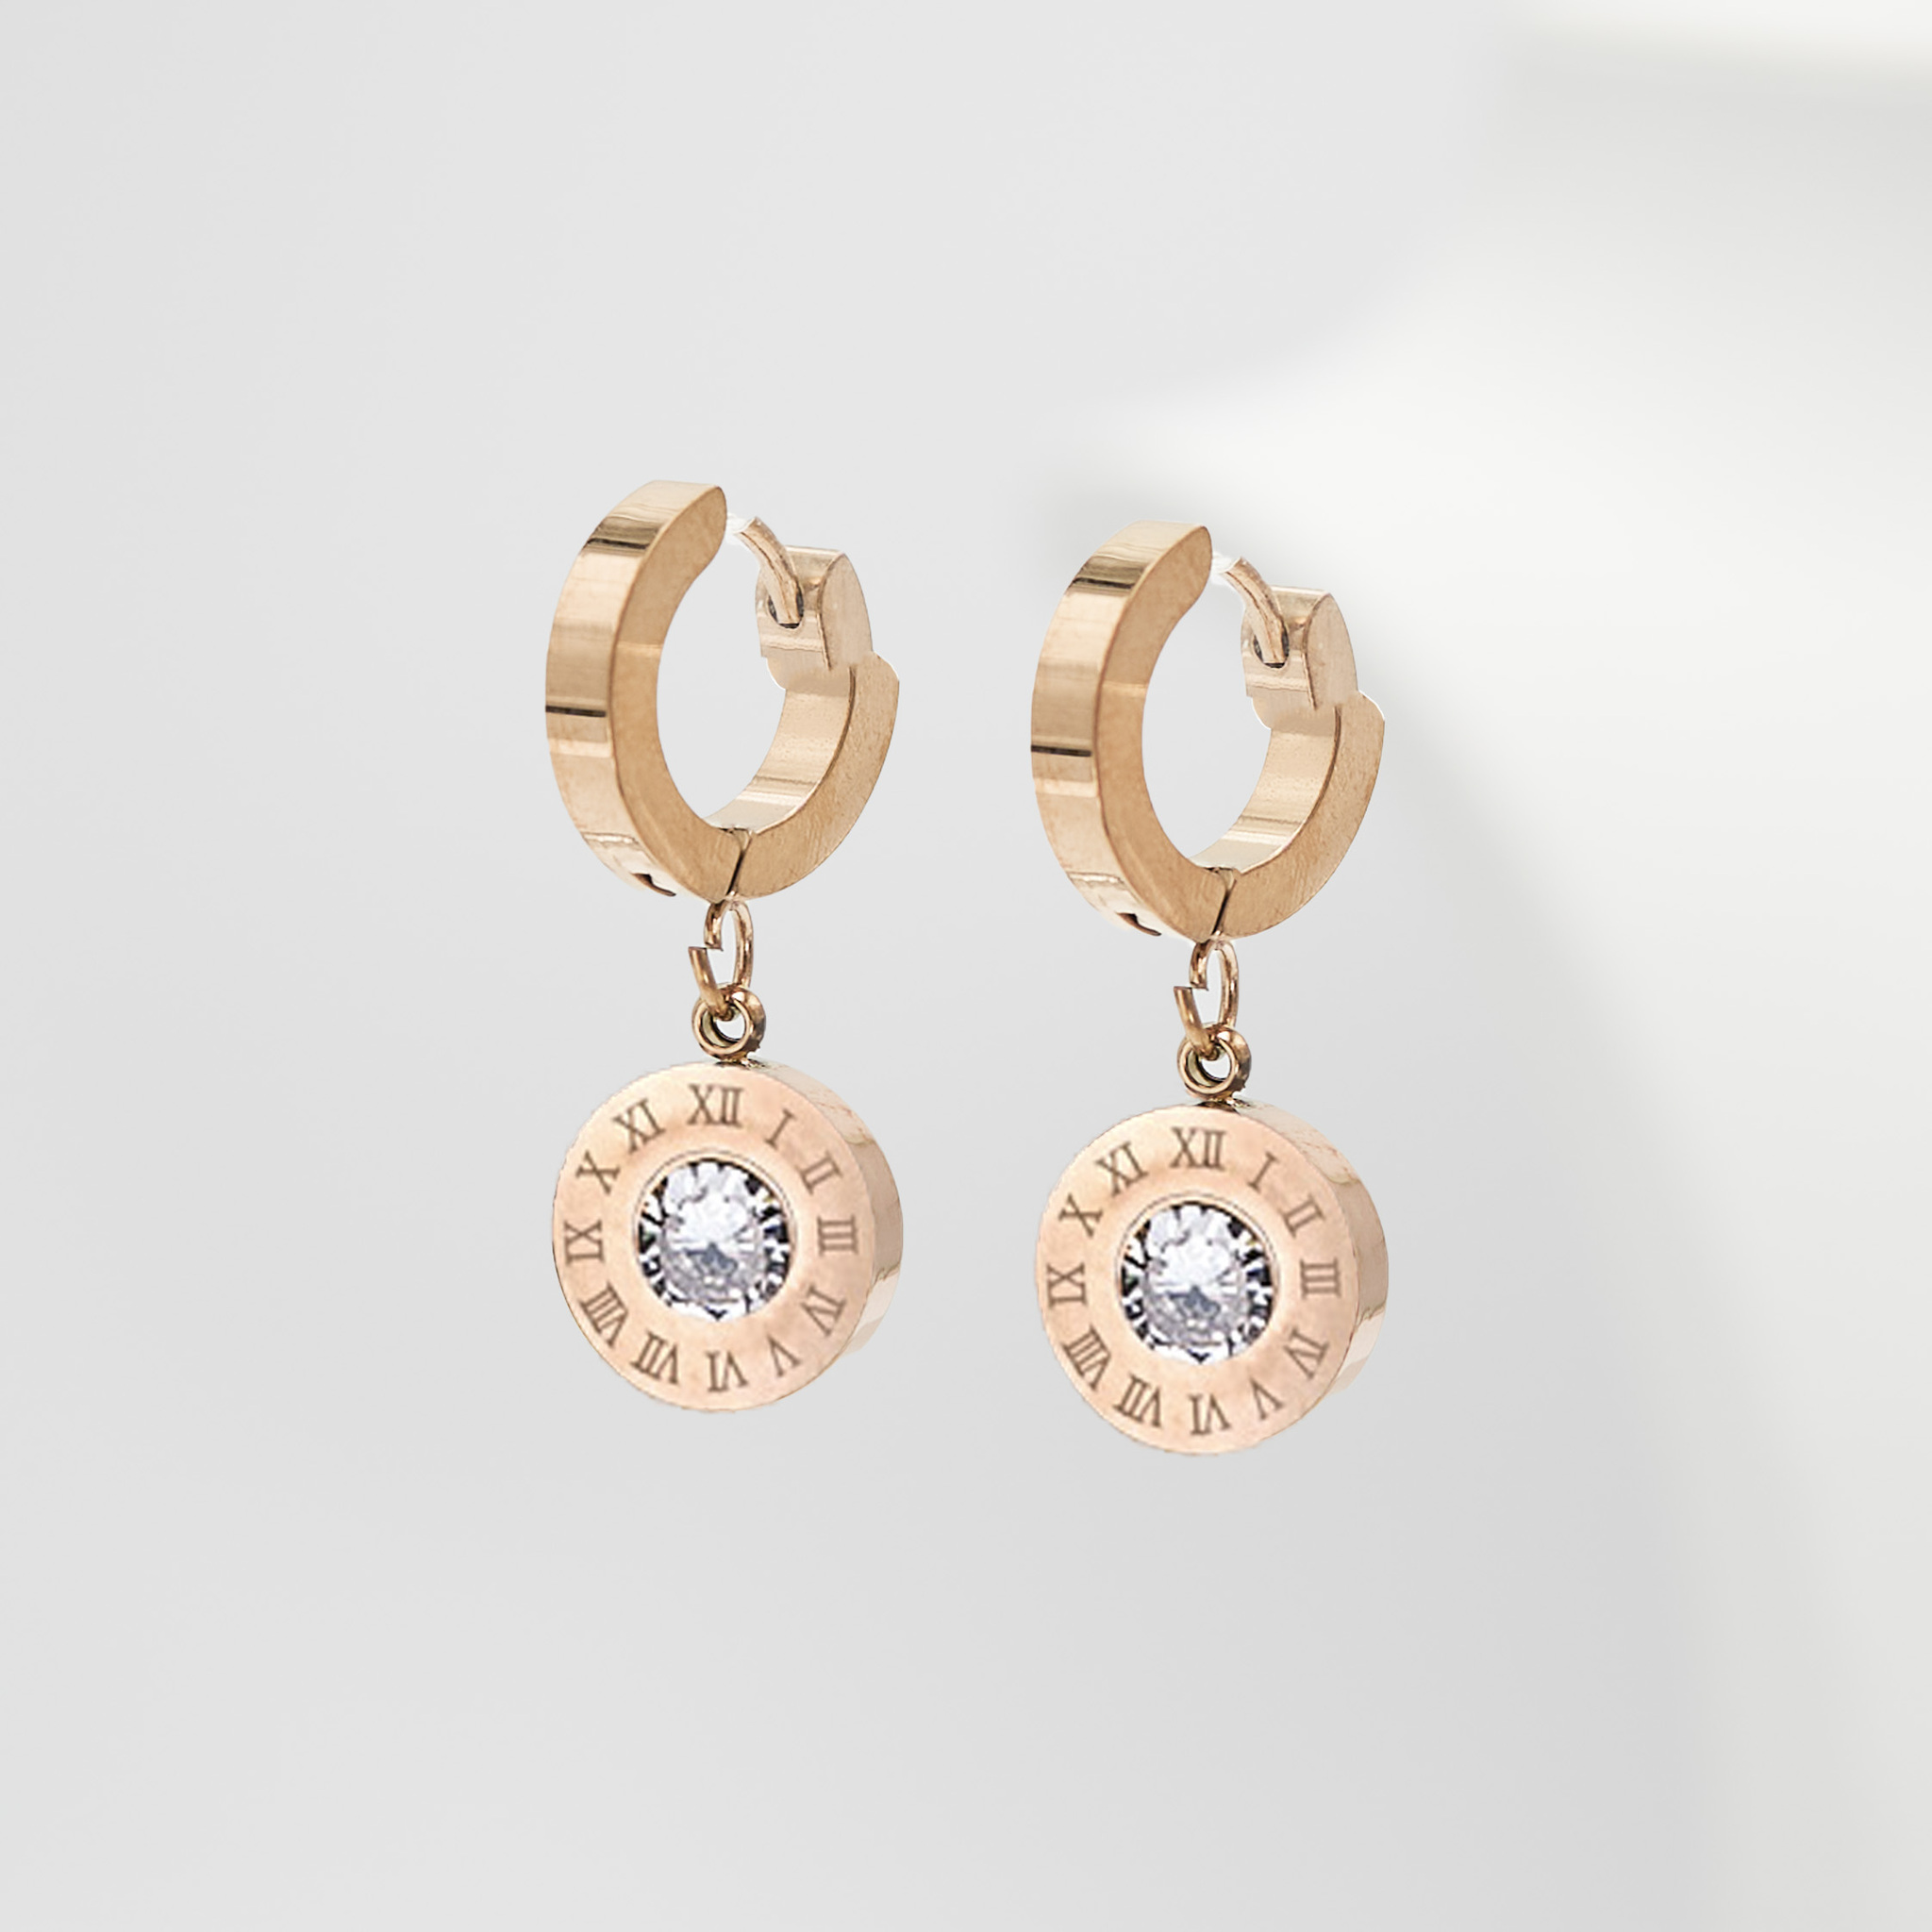 2- Queen Earrings Diamonds Rose Gold Edition- Örhänge 316L - Special Earrings From SWEVALI